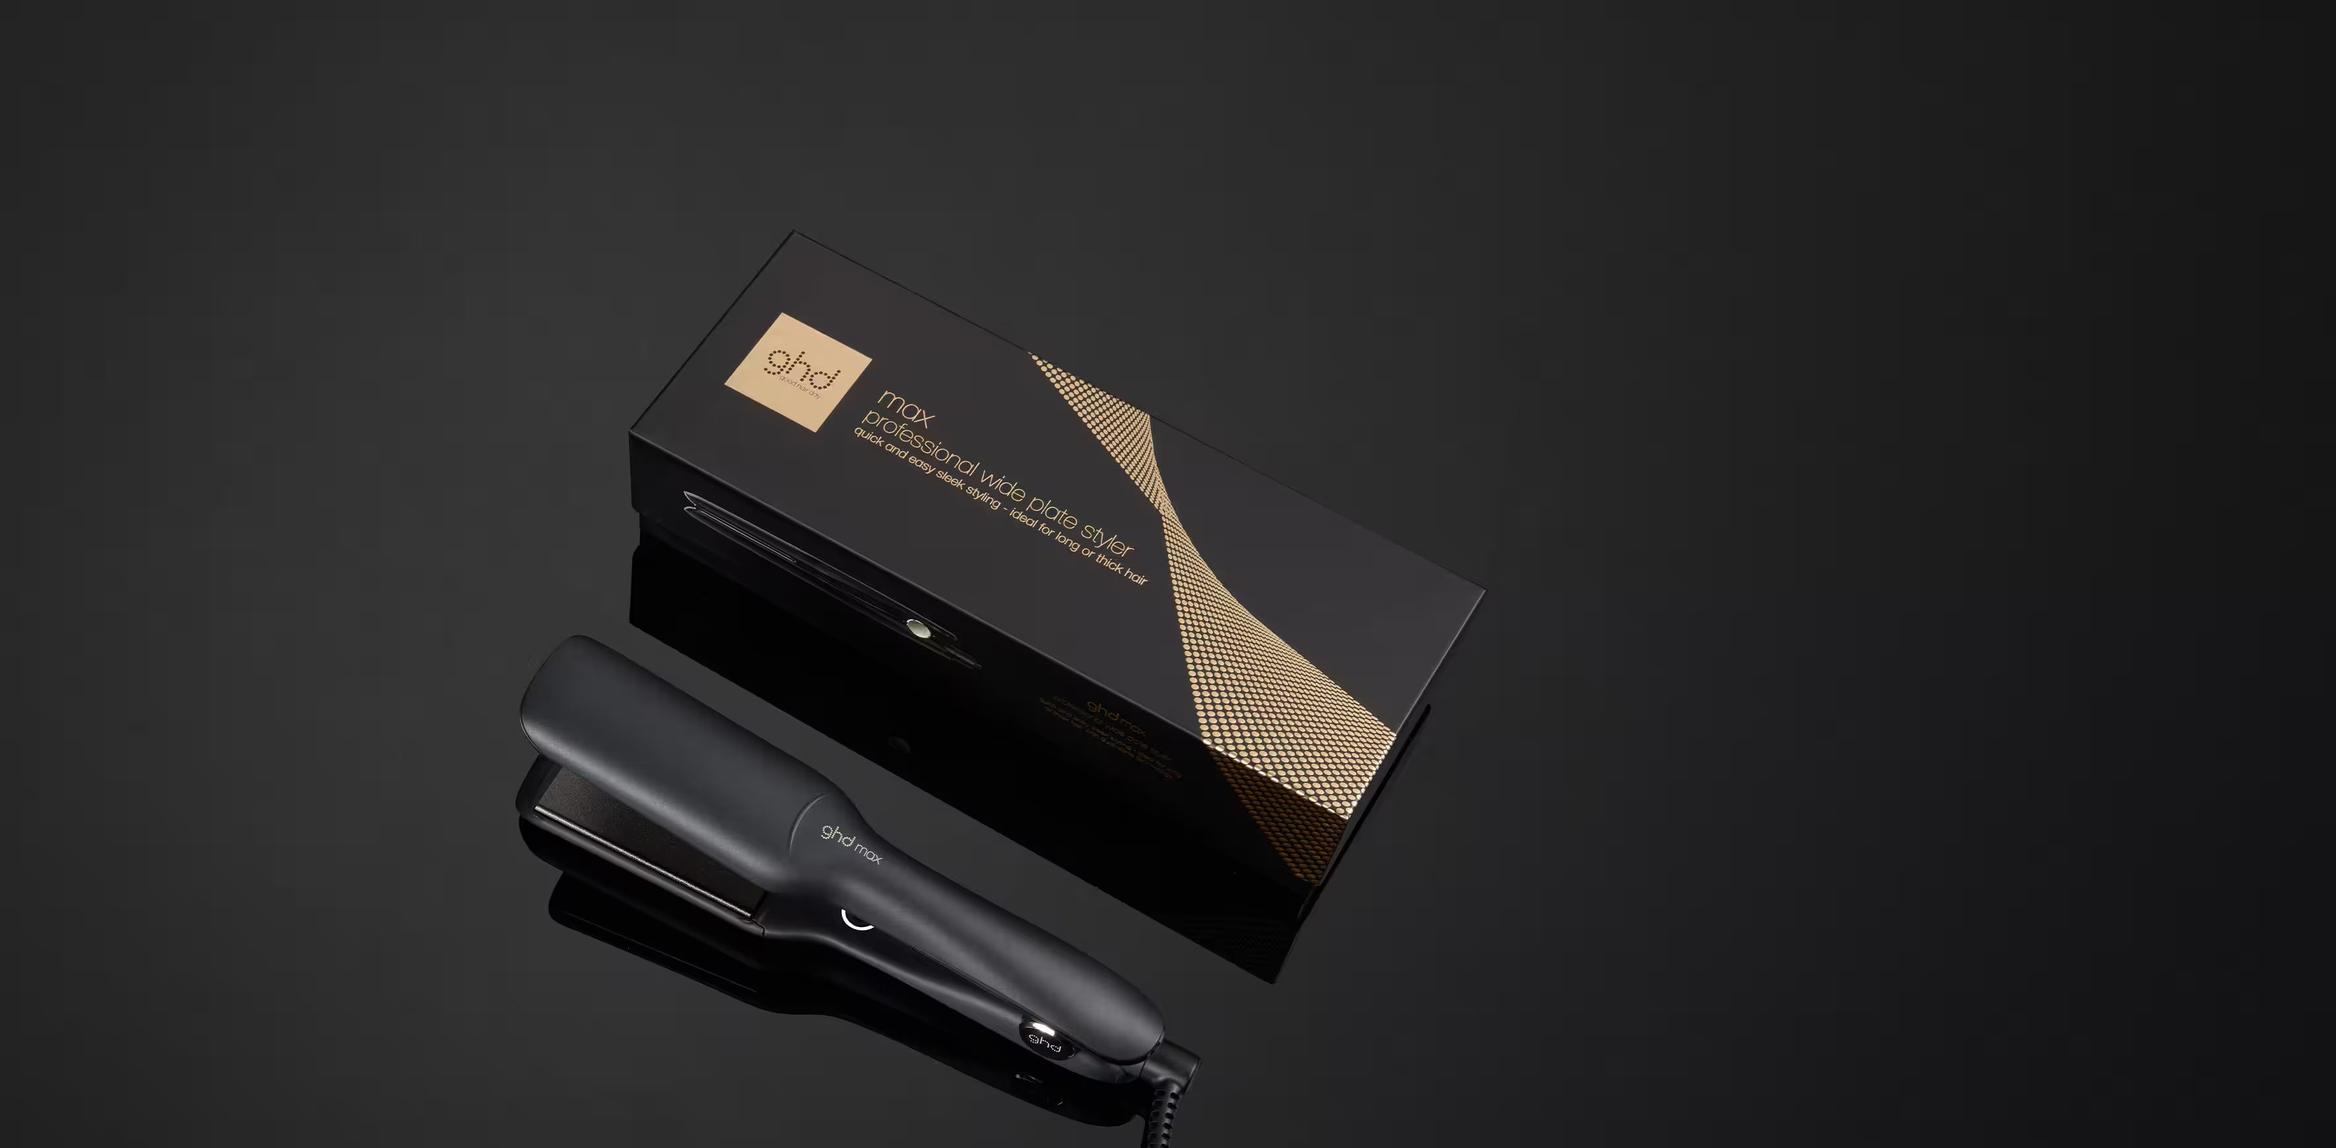 GHD MAX WIDE HAIR STRAIGHTENER offers at $284 in ghd